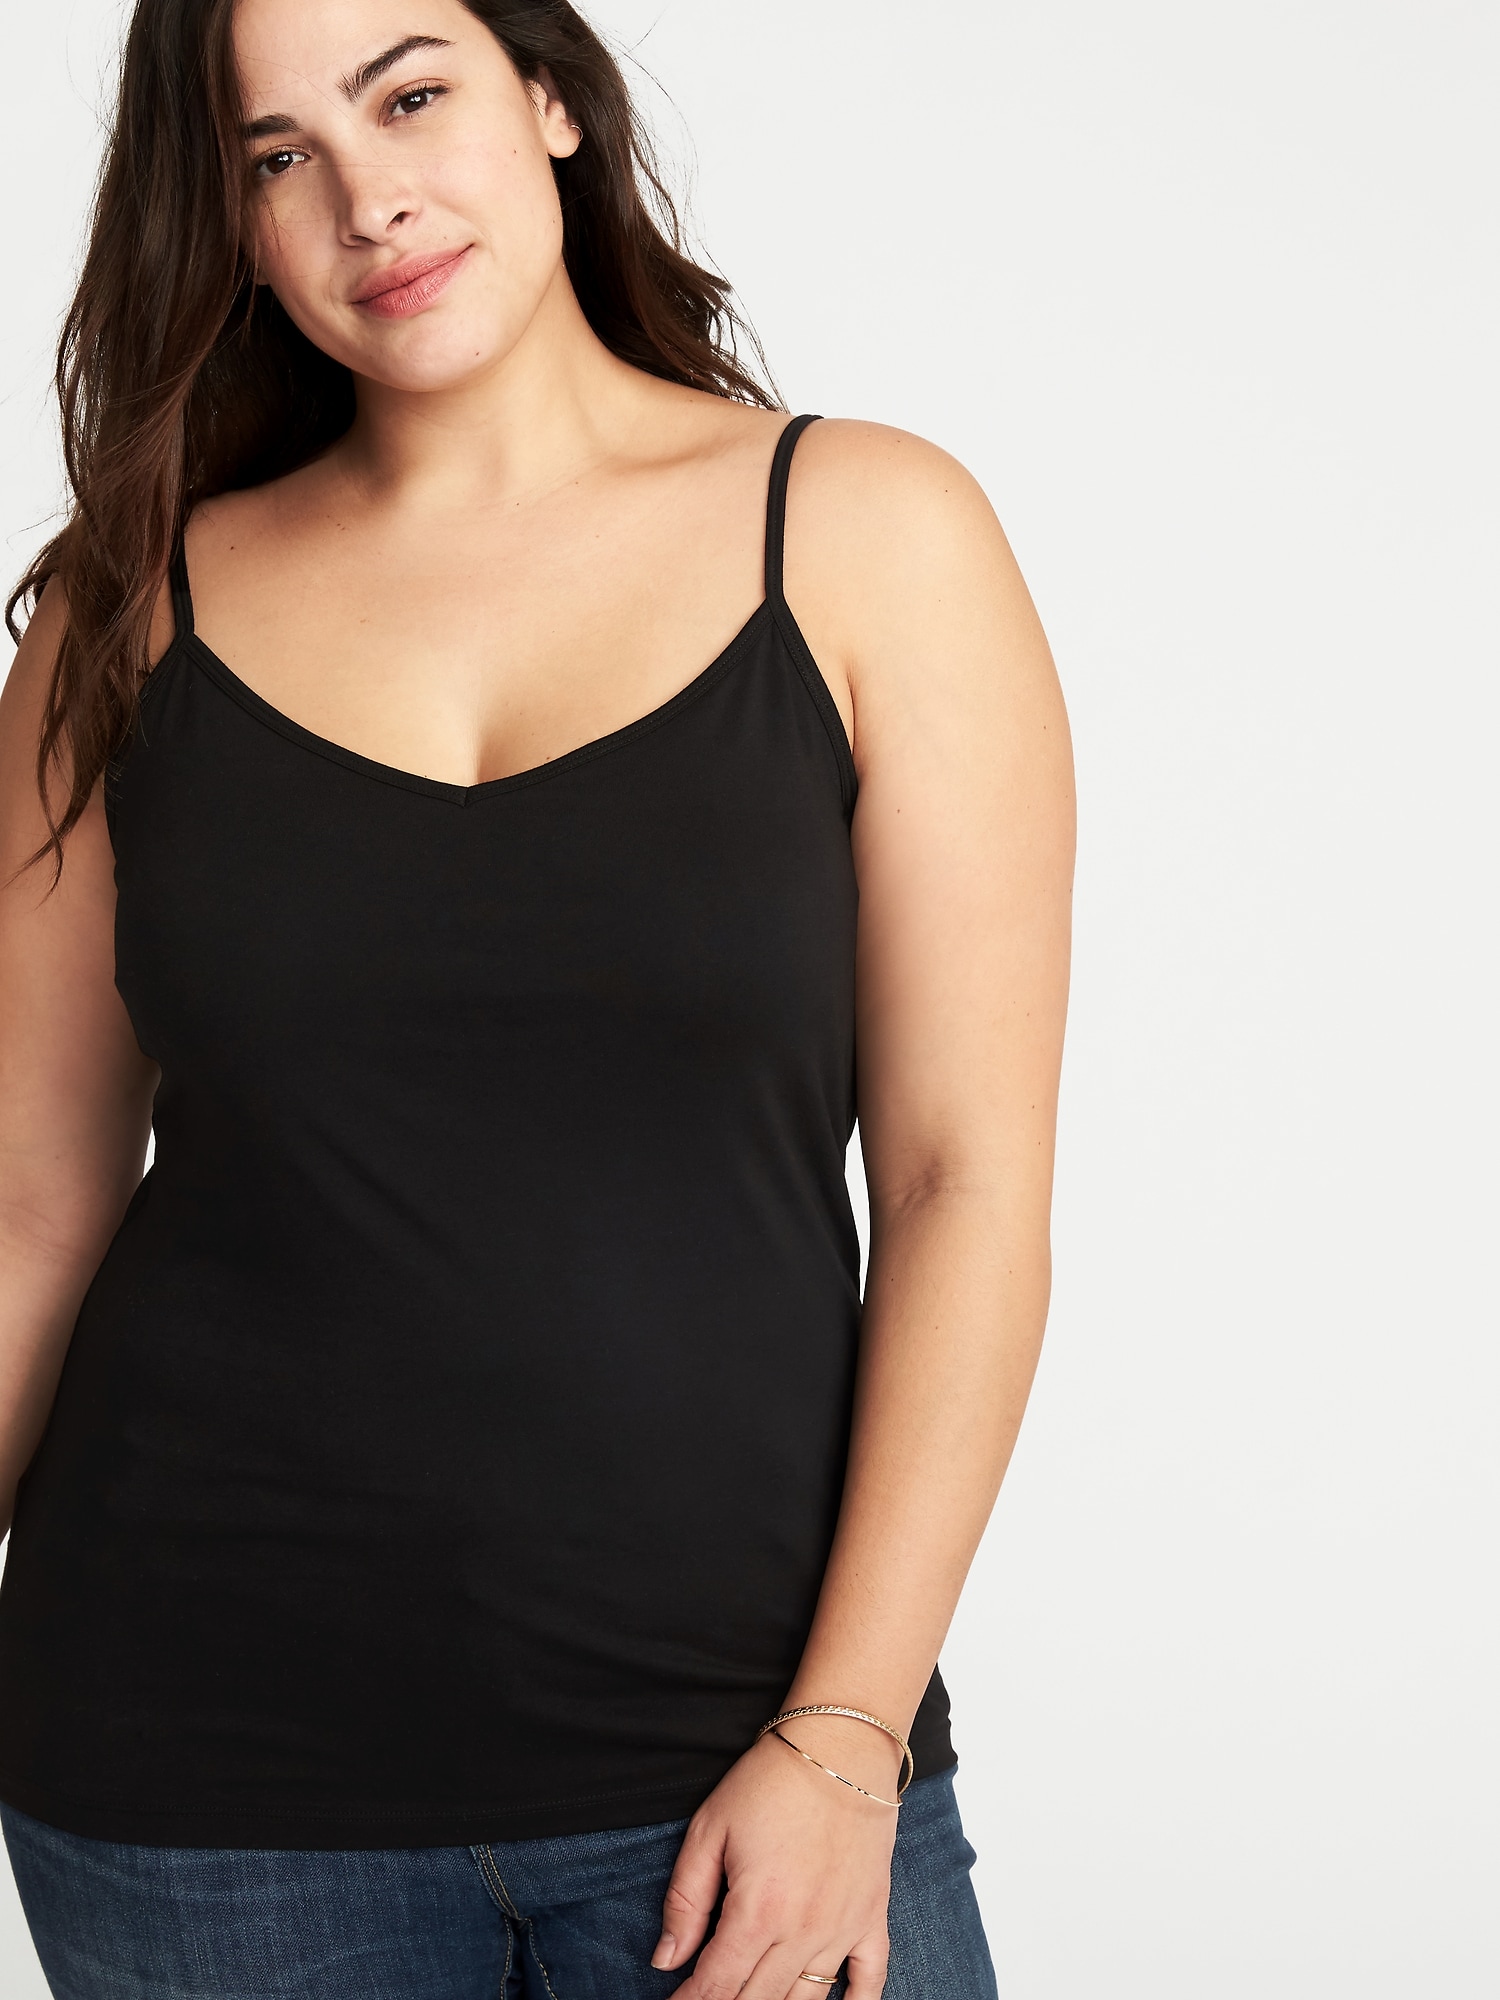 Womens Tank Tops Women's Plus Size Camisole Adjustable Strap Camisole with  Built in Padded Bra Vest Cami Sleeveless Layer Top 